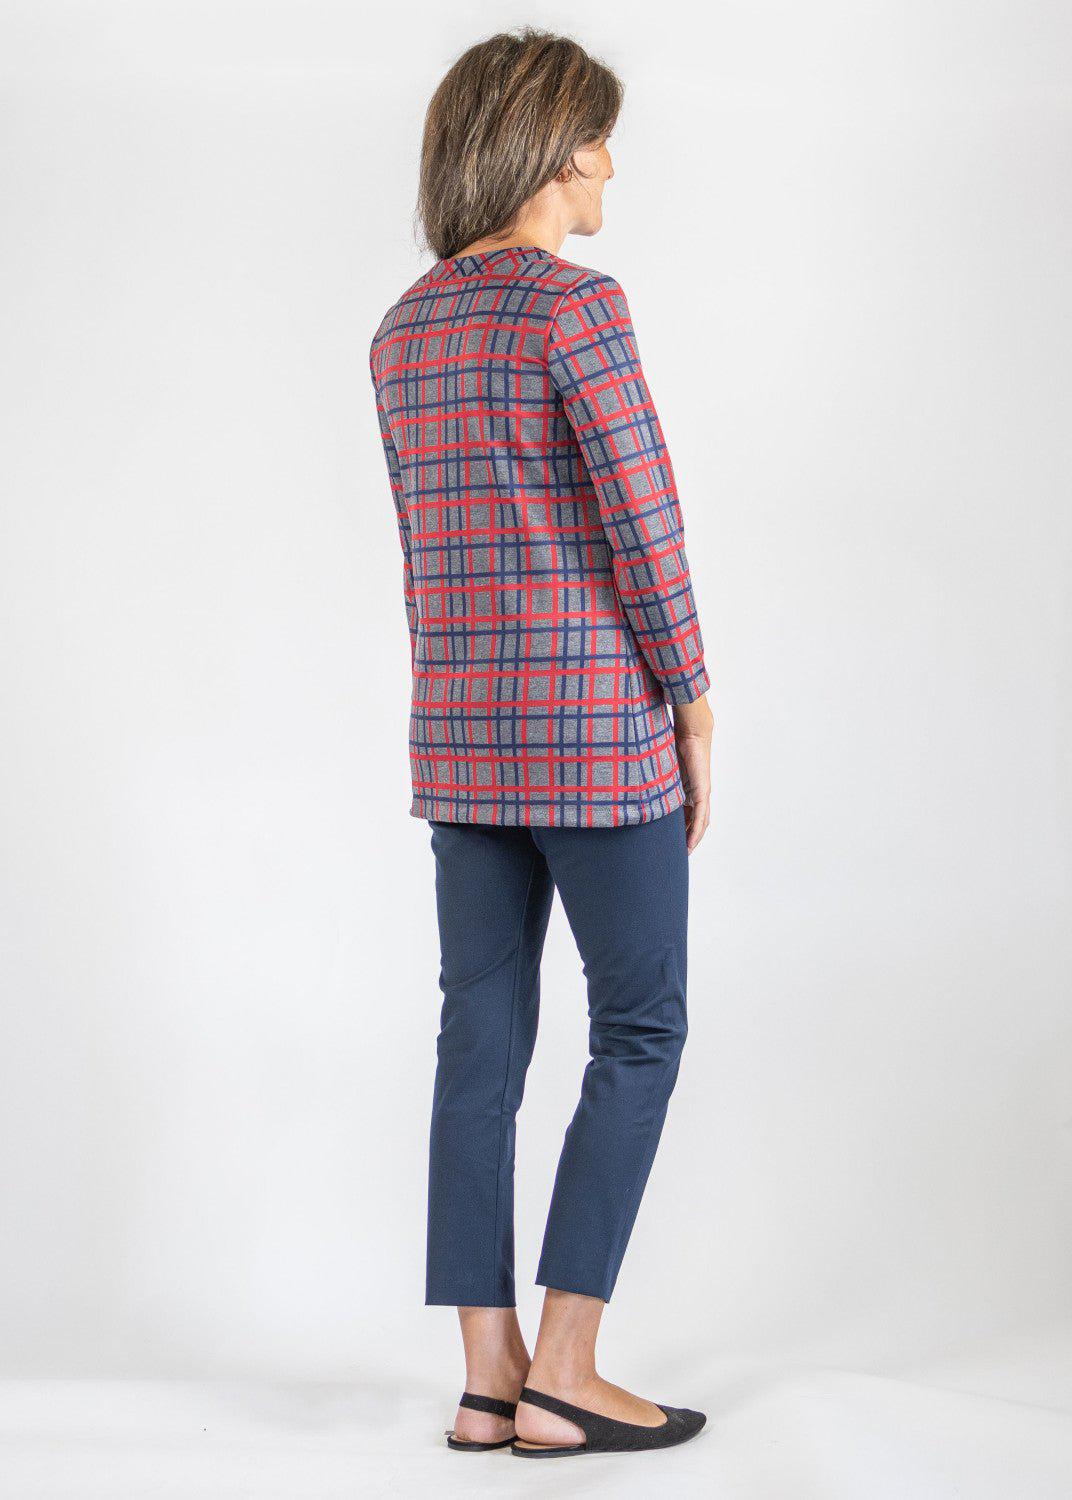 lucille-top-plaid-grey-navy-red-back-369775.jpg